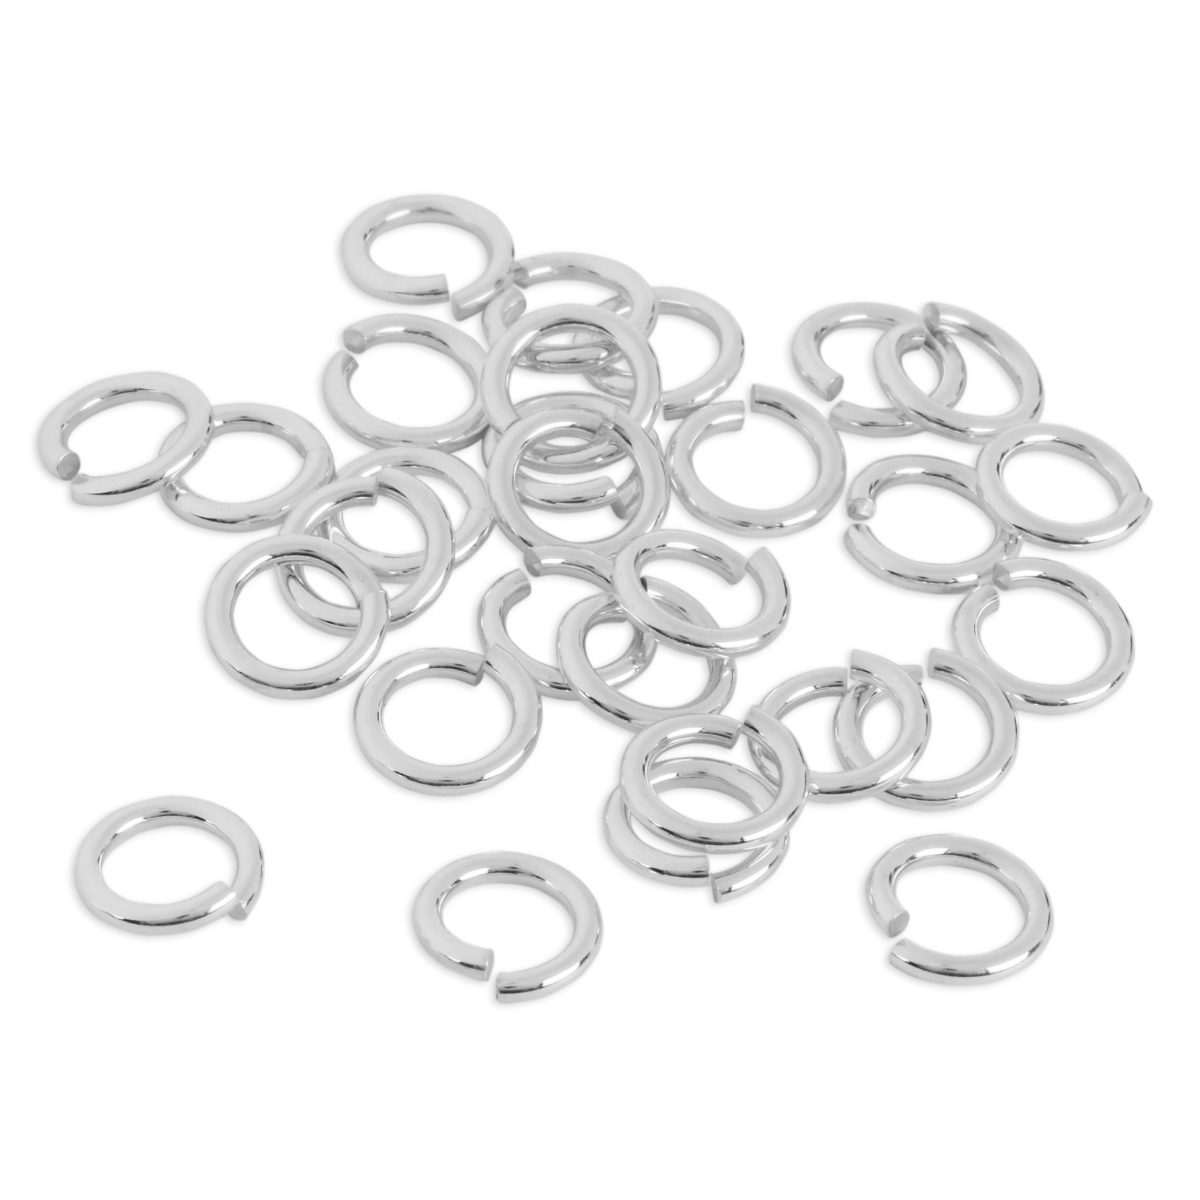 Sterling Silver 5mm I.D. 16 Gauge Jump Rings, Pack of 20 – Beaducation